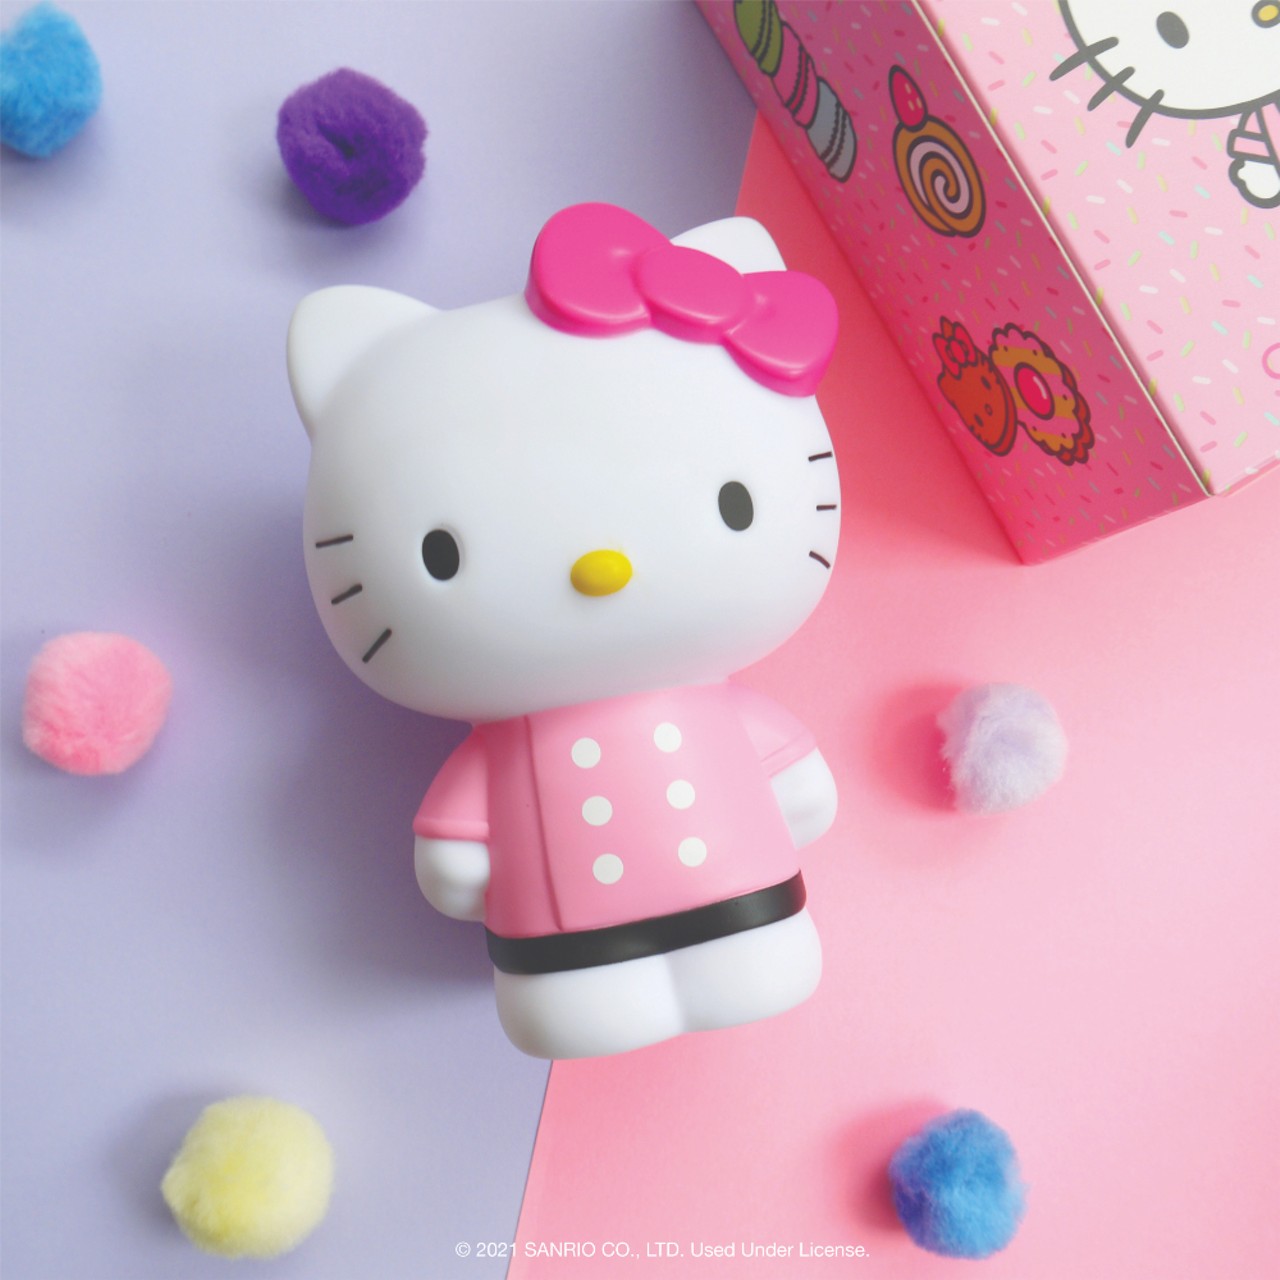 The Hello Kitty Cafe Truck Will Be in St. Louis Tomorrow [PHOTOS]